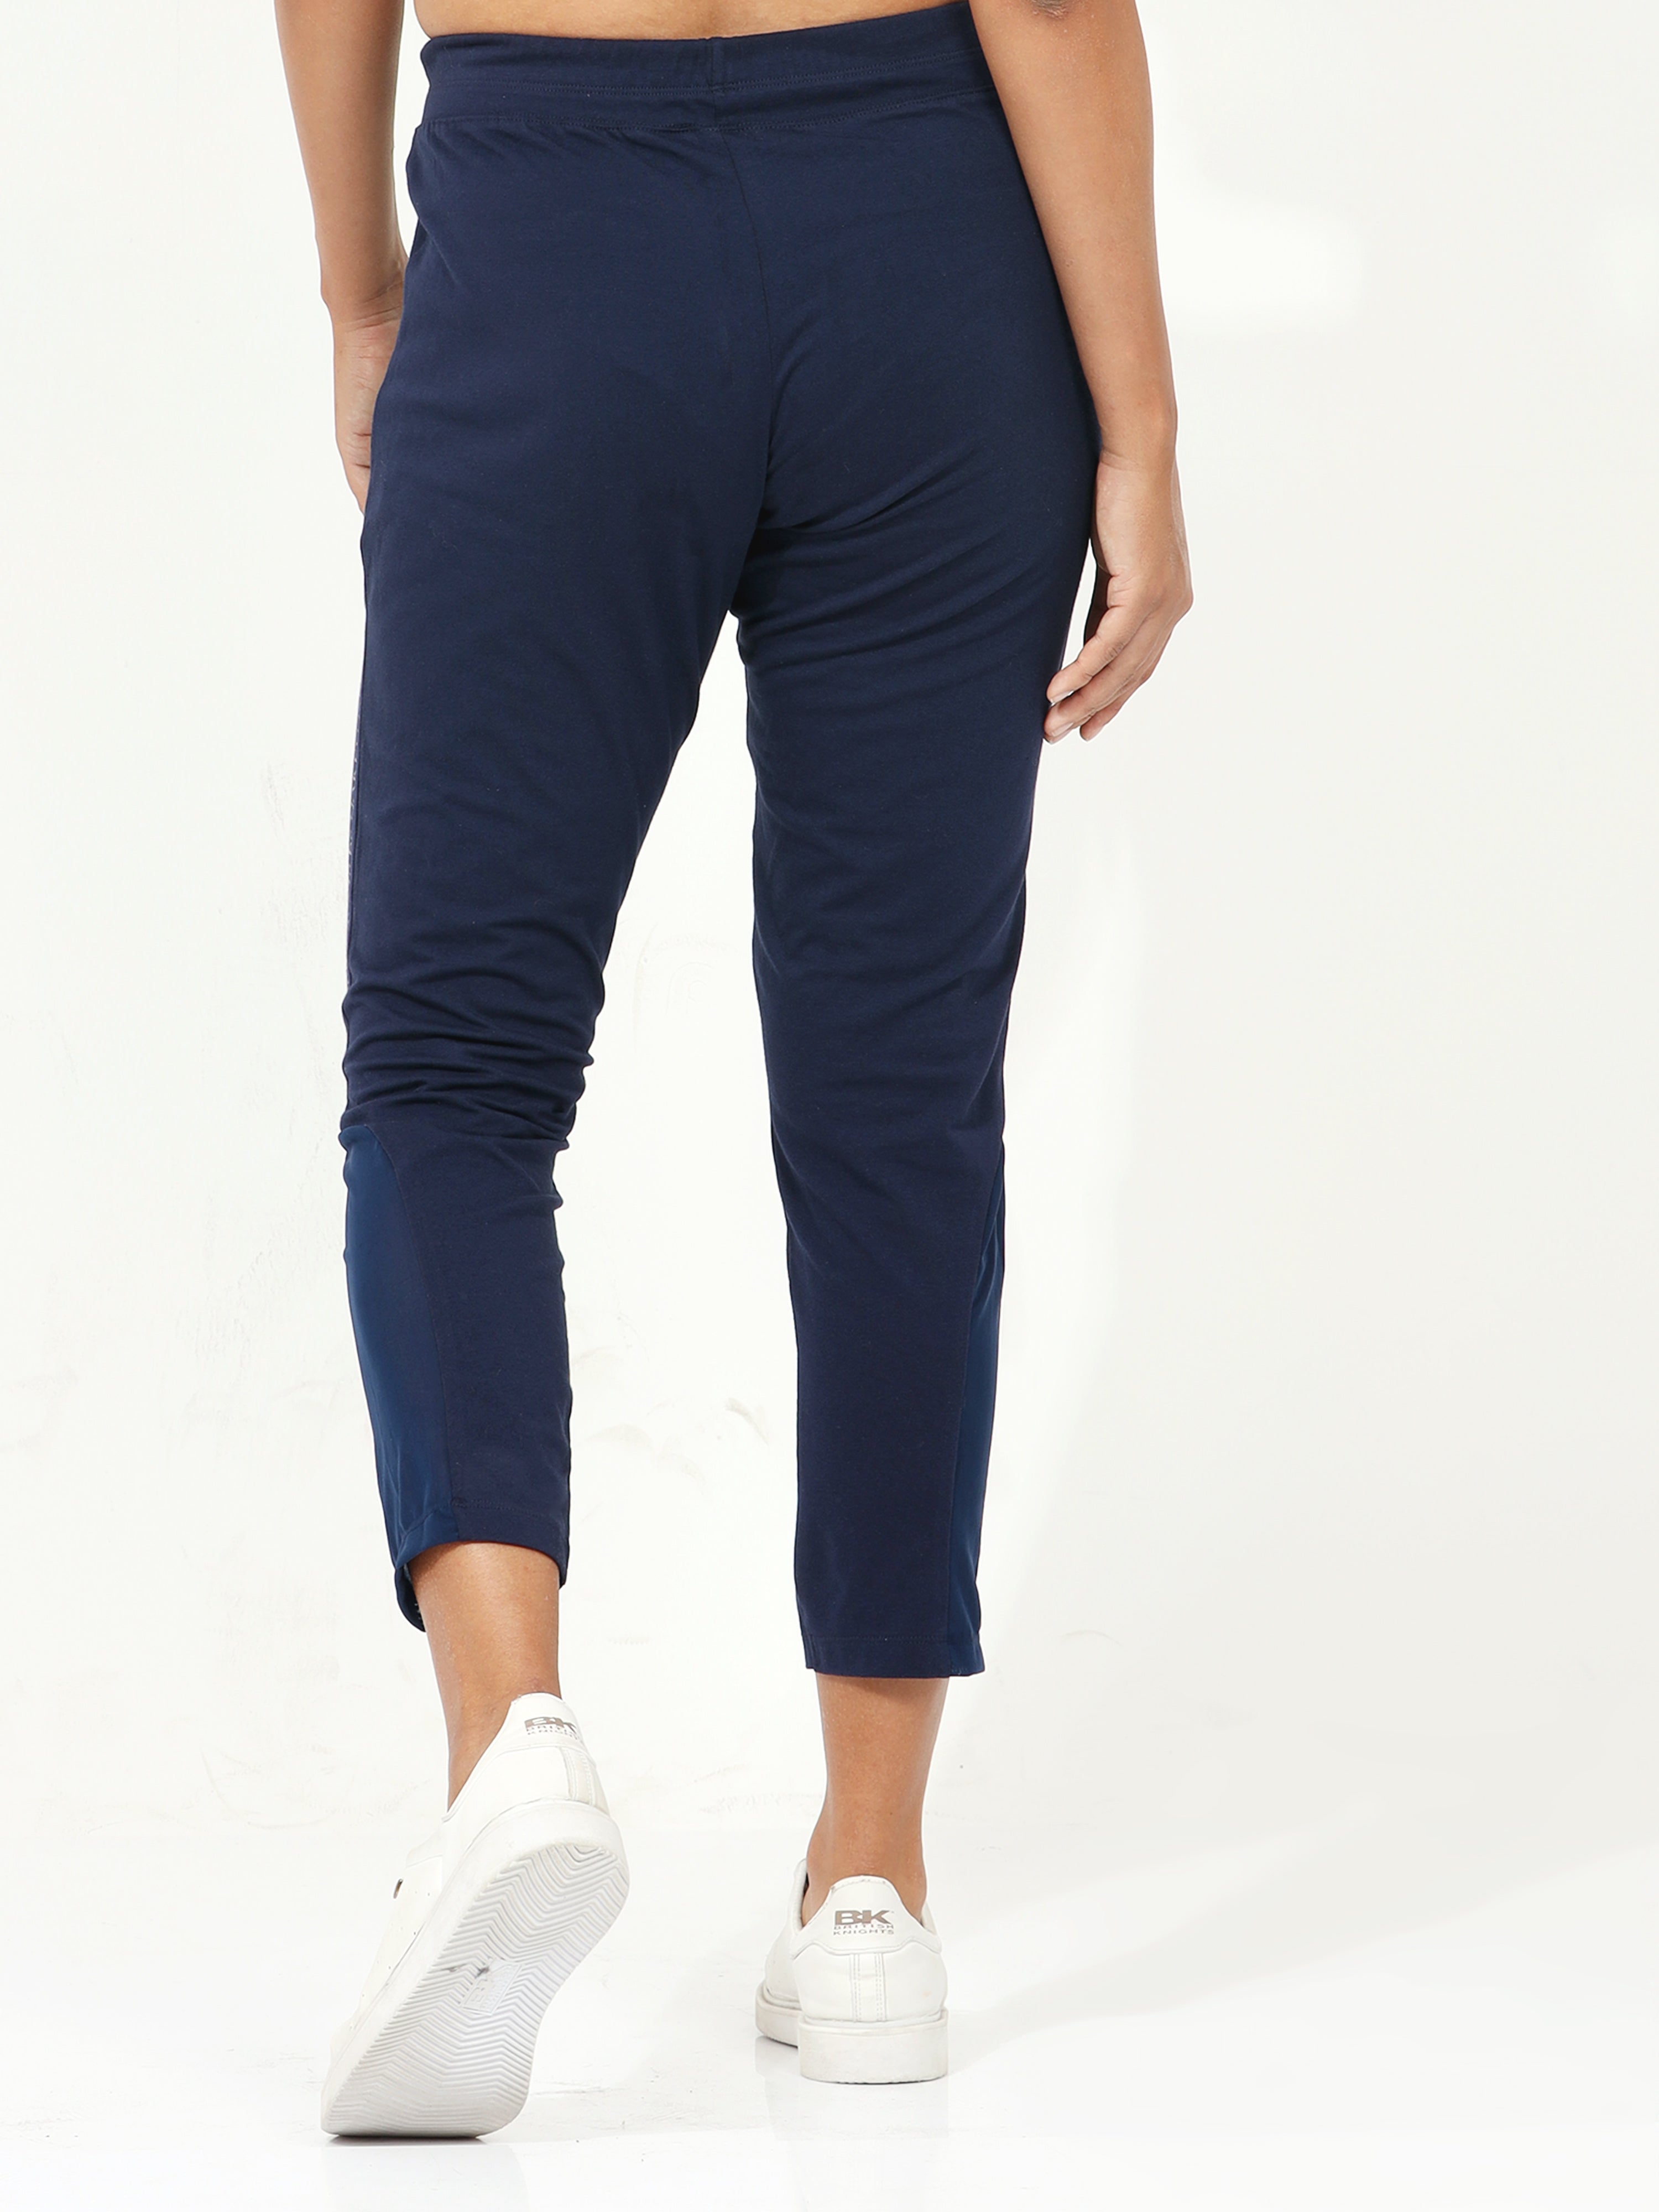 Women's Blue Track Pants High Rise | Ally Fashion